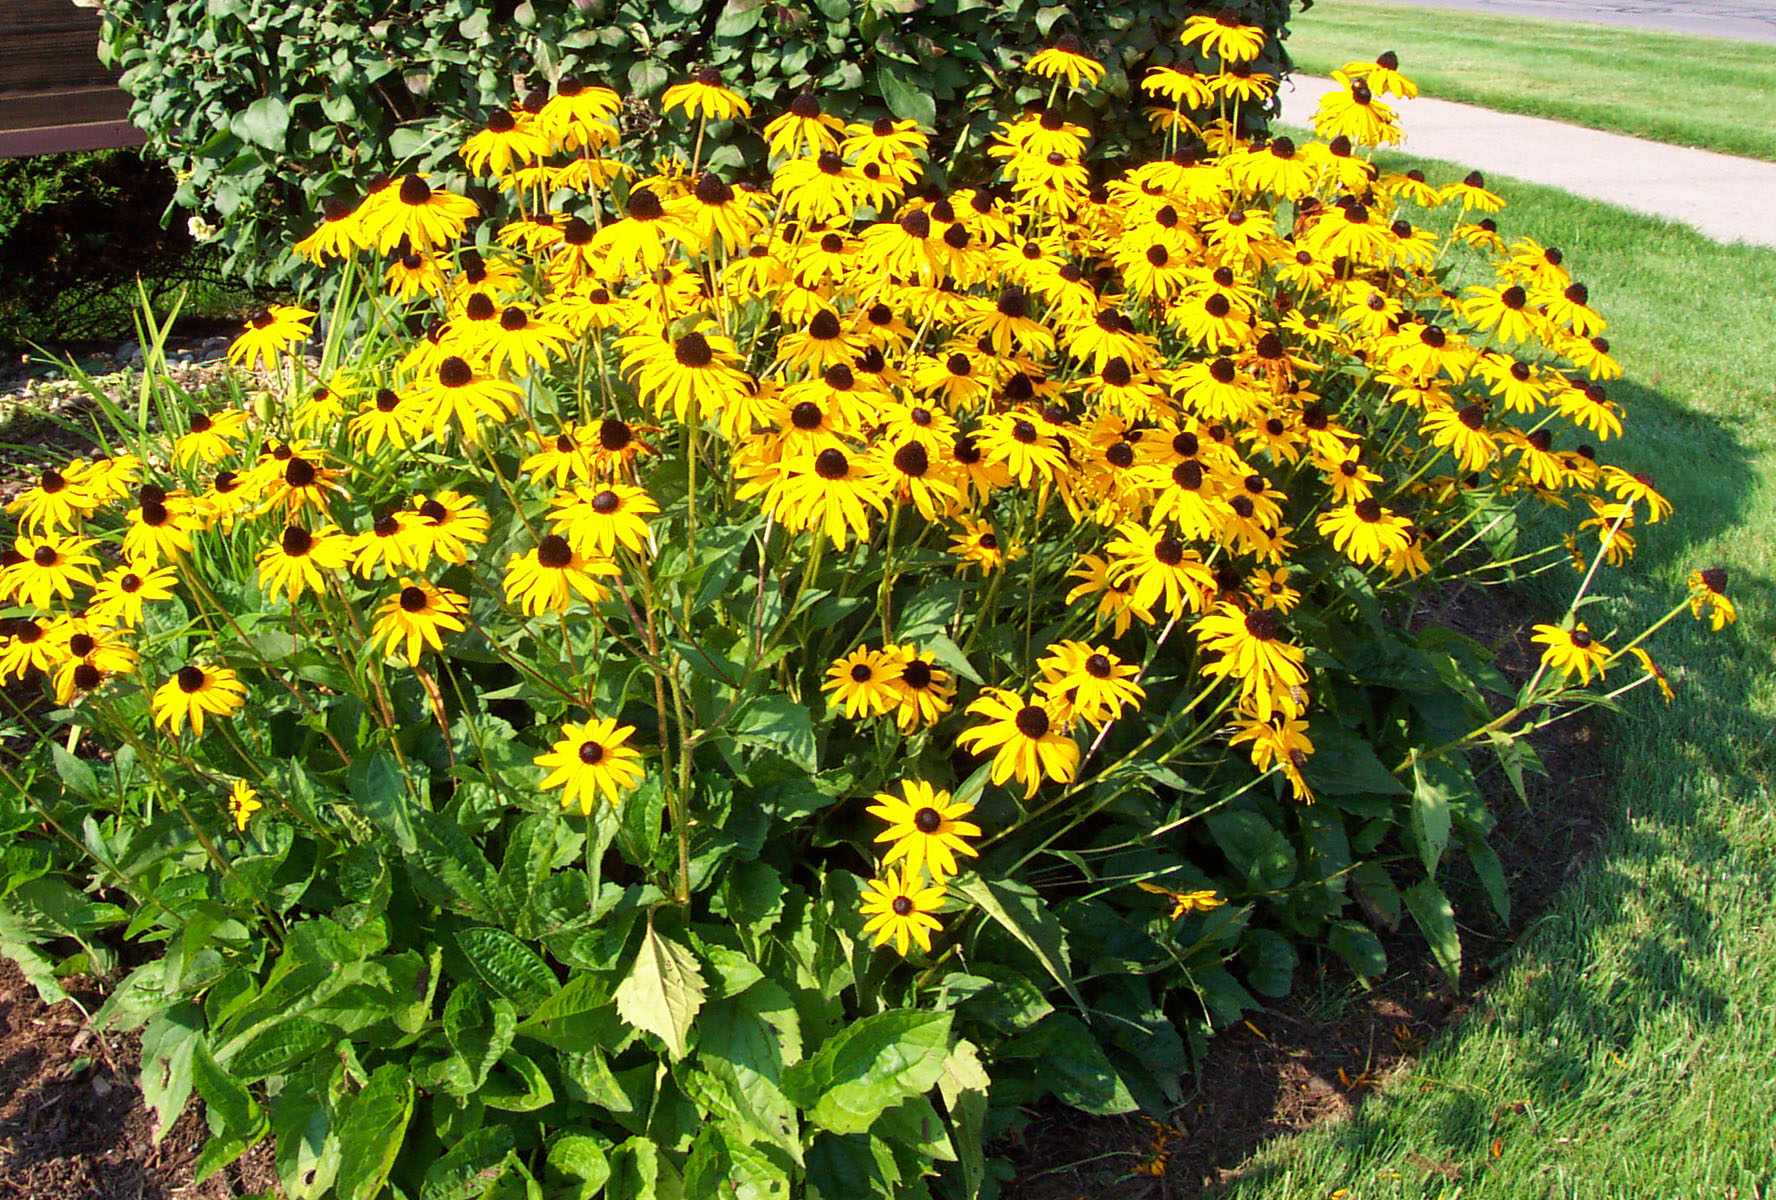 How to Grow Black Eyed Susan Plants by Garden Hobbies